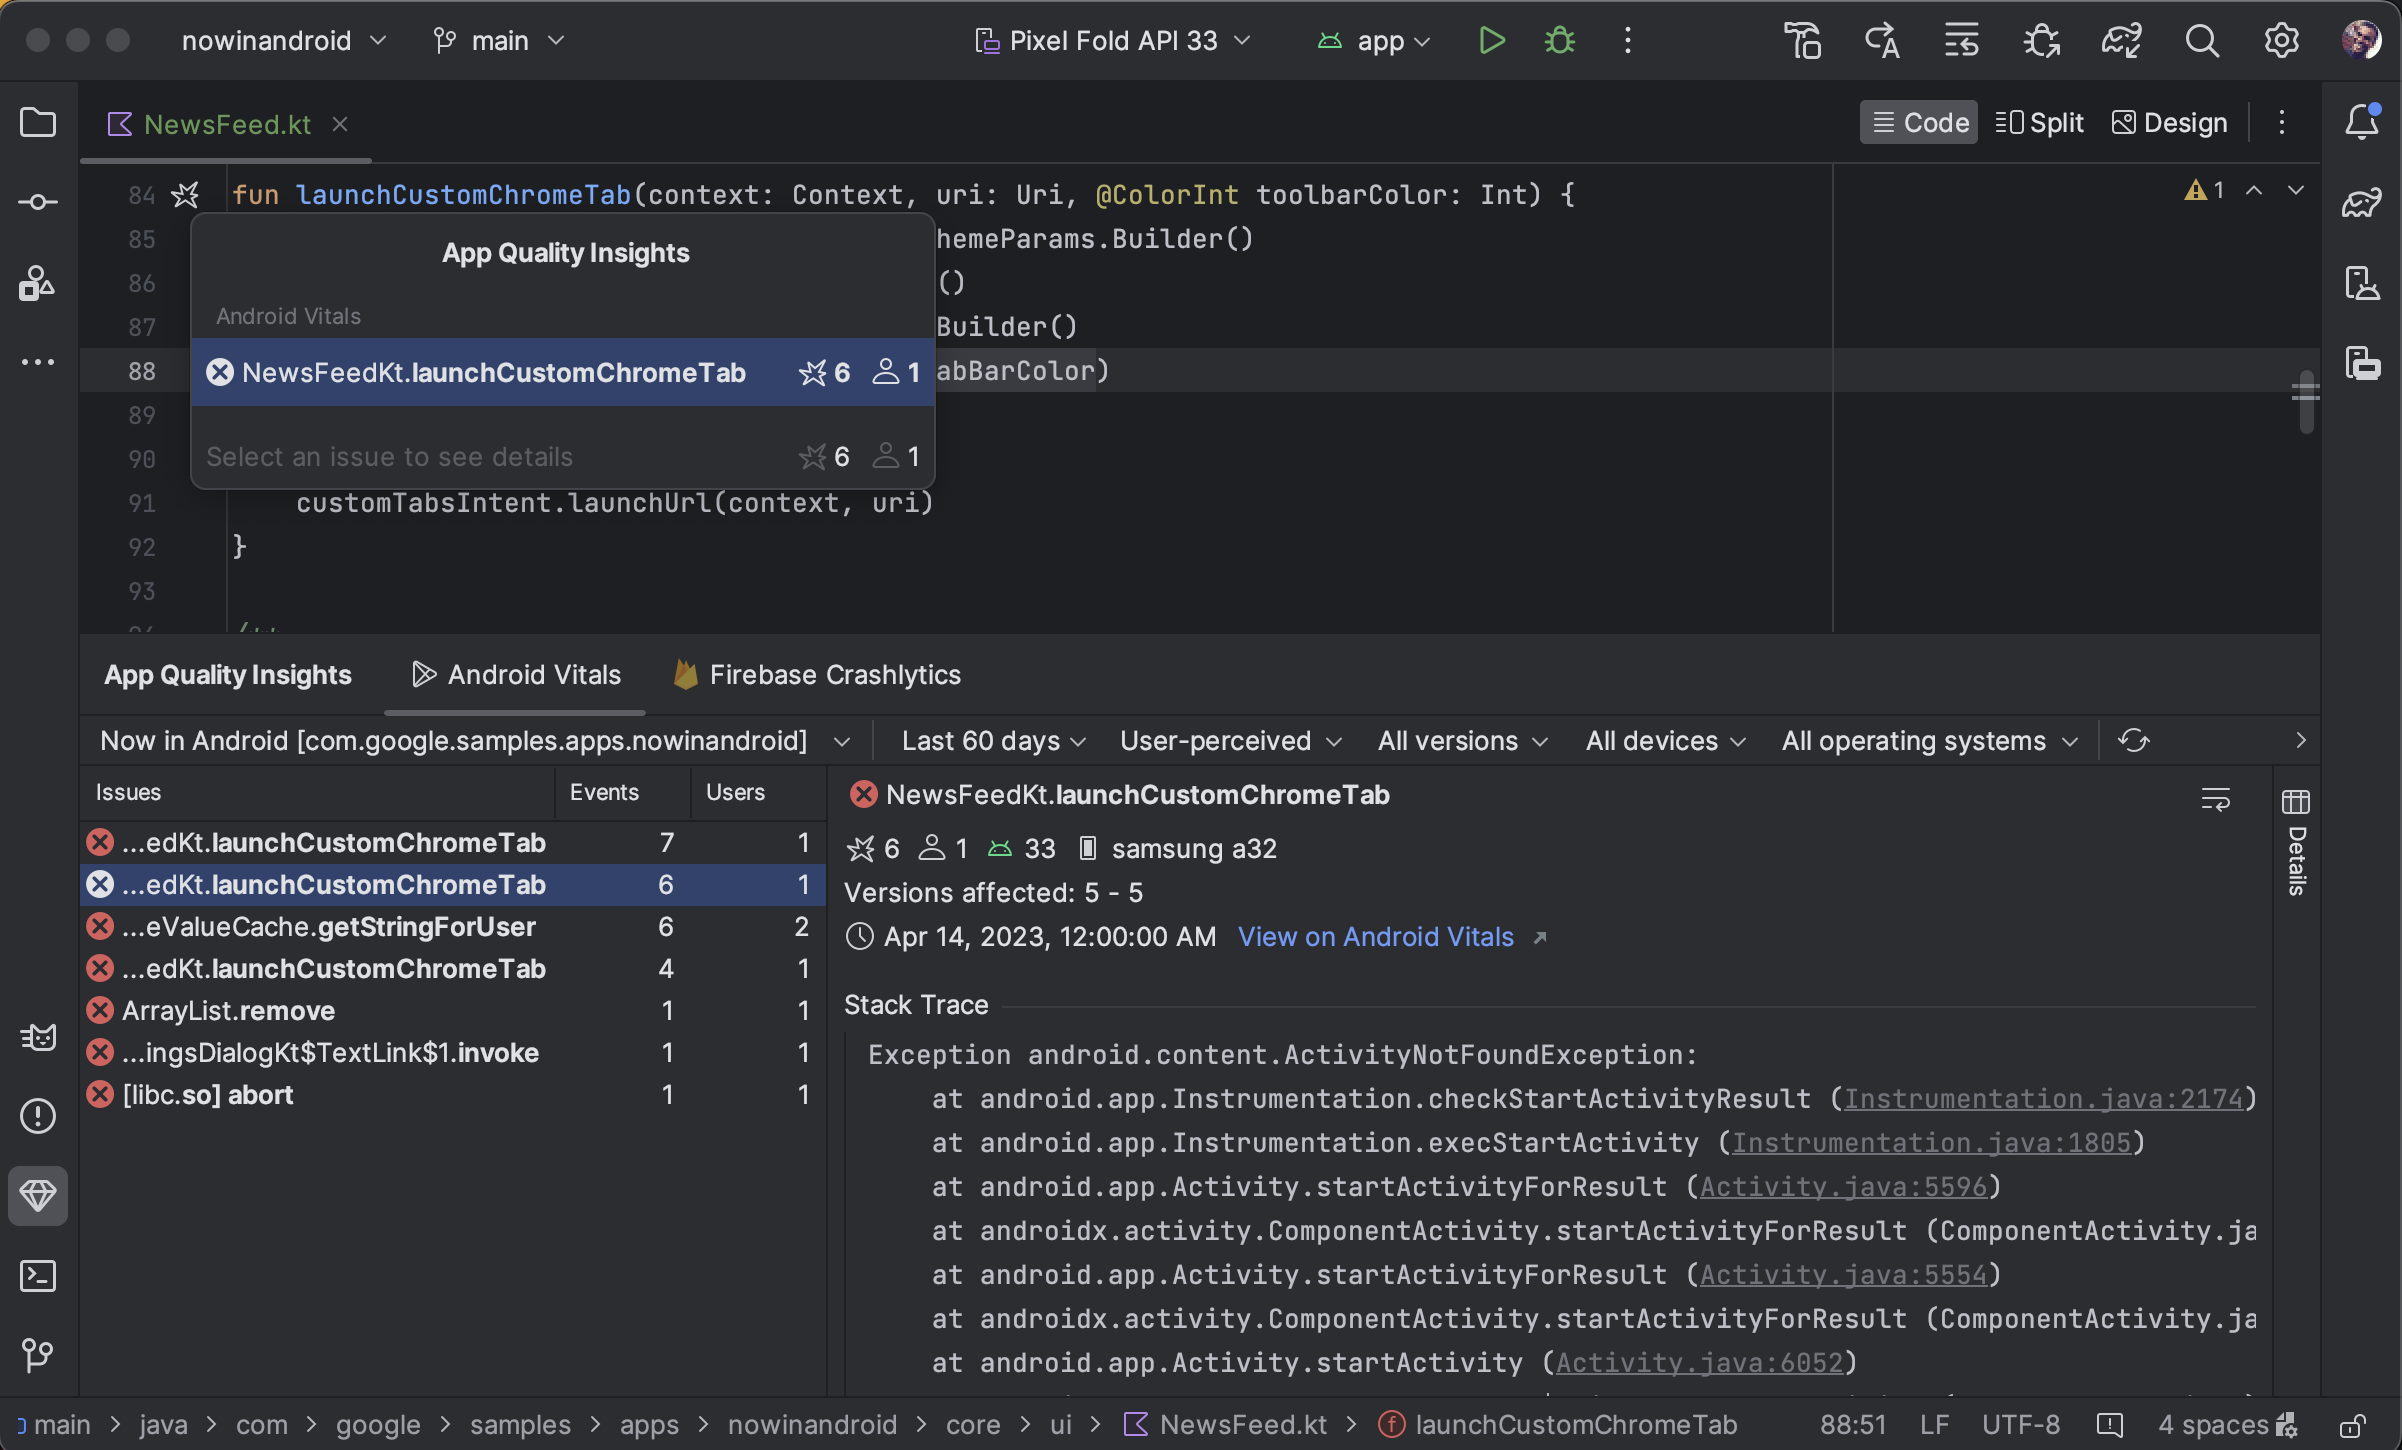 Android Vitals-Daten in Android Studio.